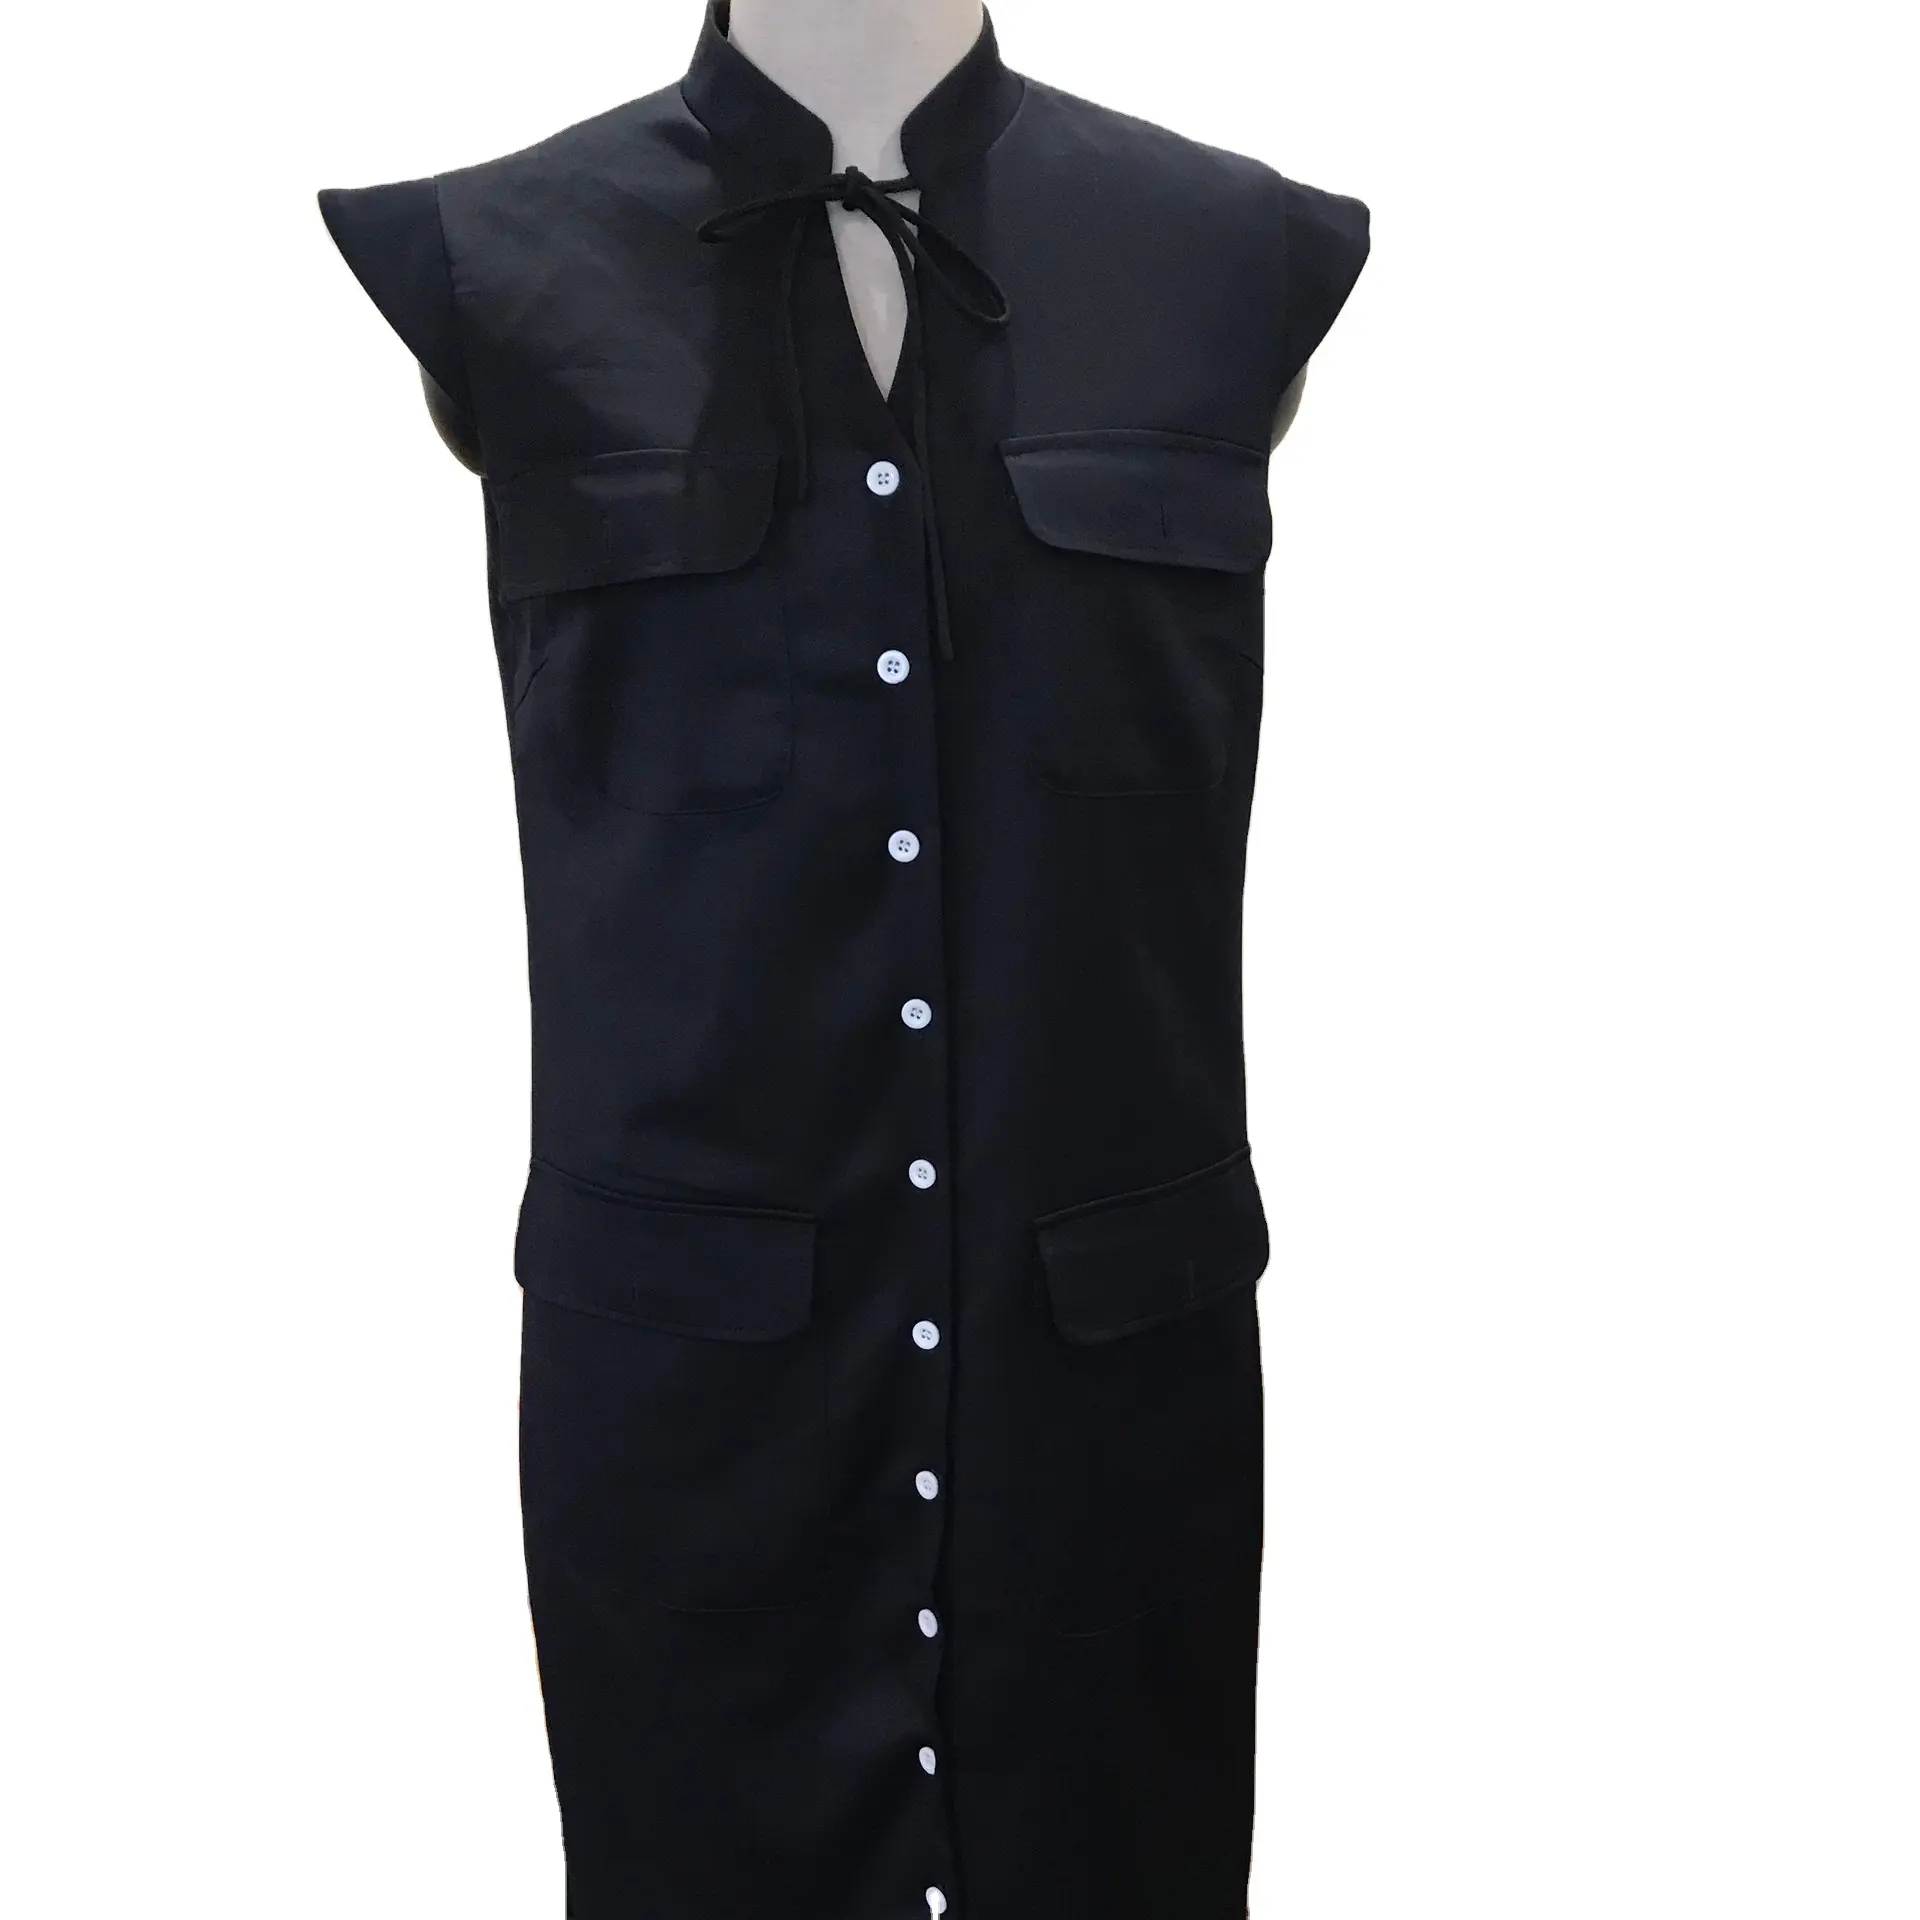 Wholesale Price From IAT Garment Factory Sleeveless Pockets Single Breasted Navy Color Dress Women Office Dress